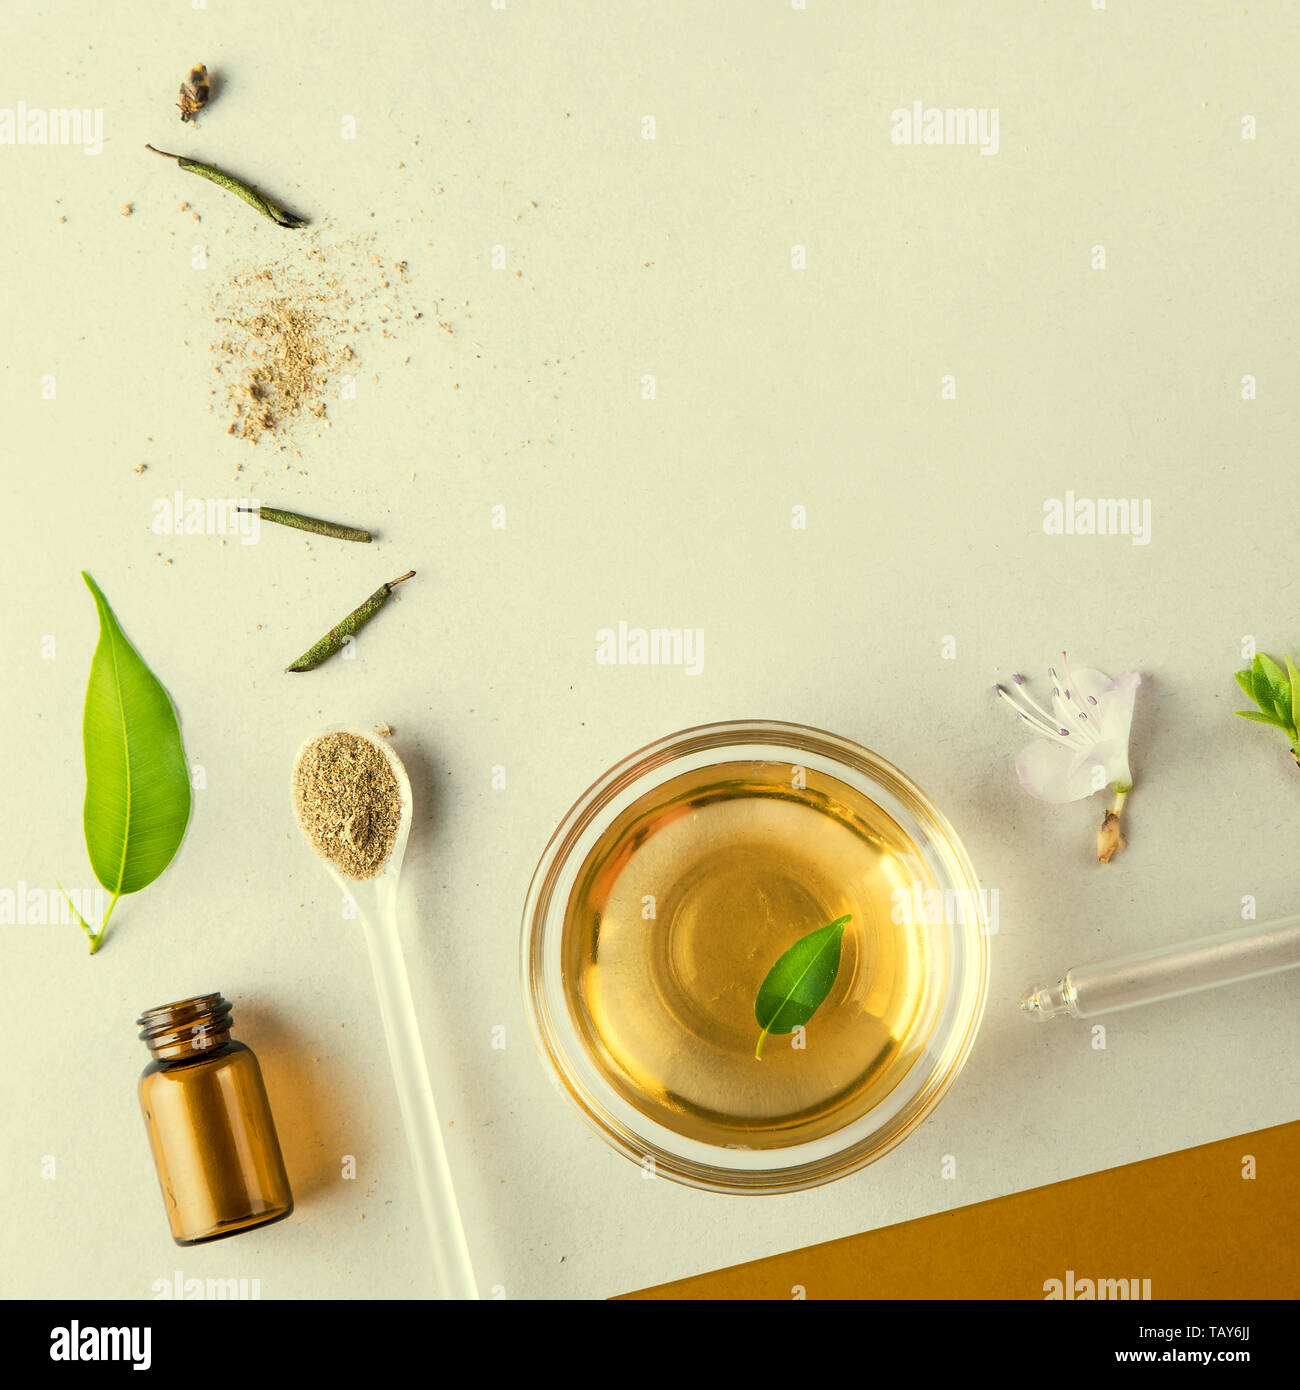 The minimal style. Natural cosmetics, handmade skin and body care. Natural oil and vegetable ingredients. Flat lay Stock Photo